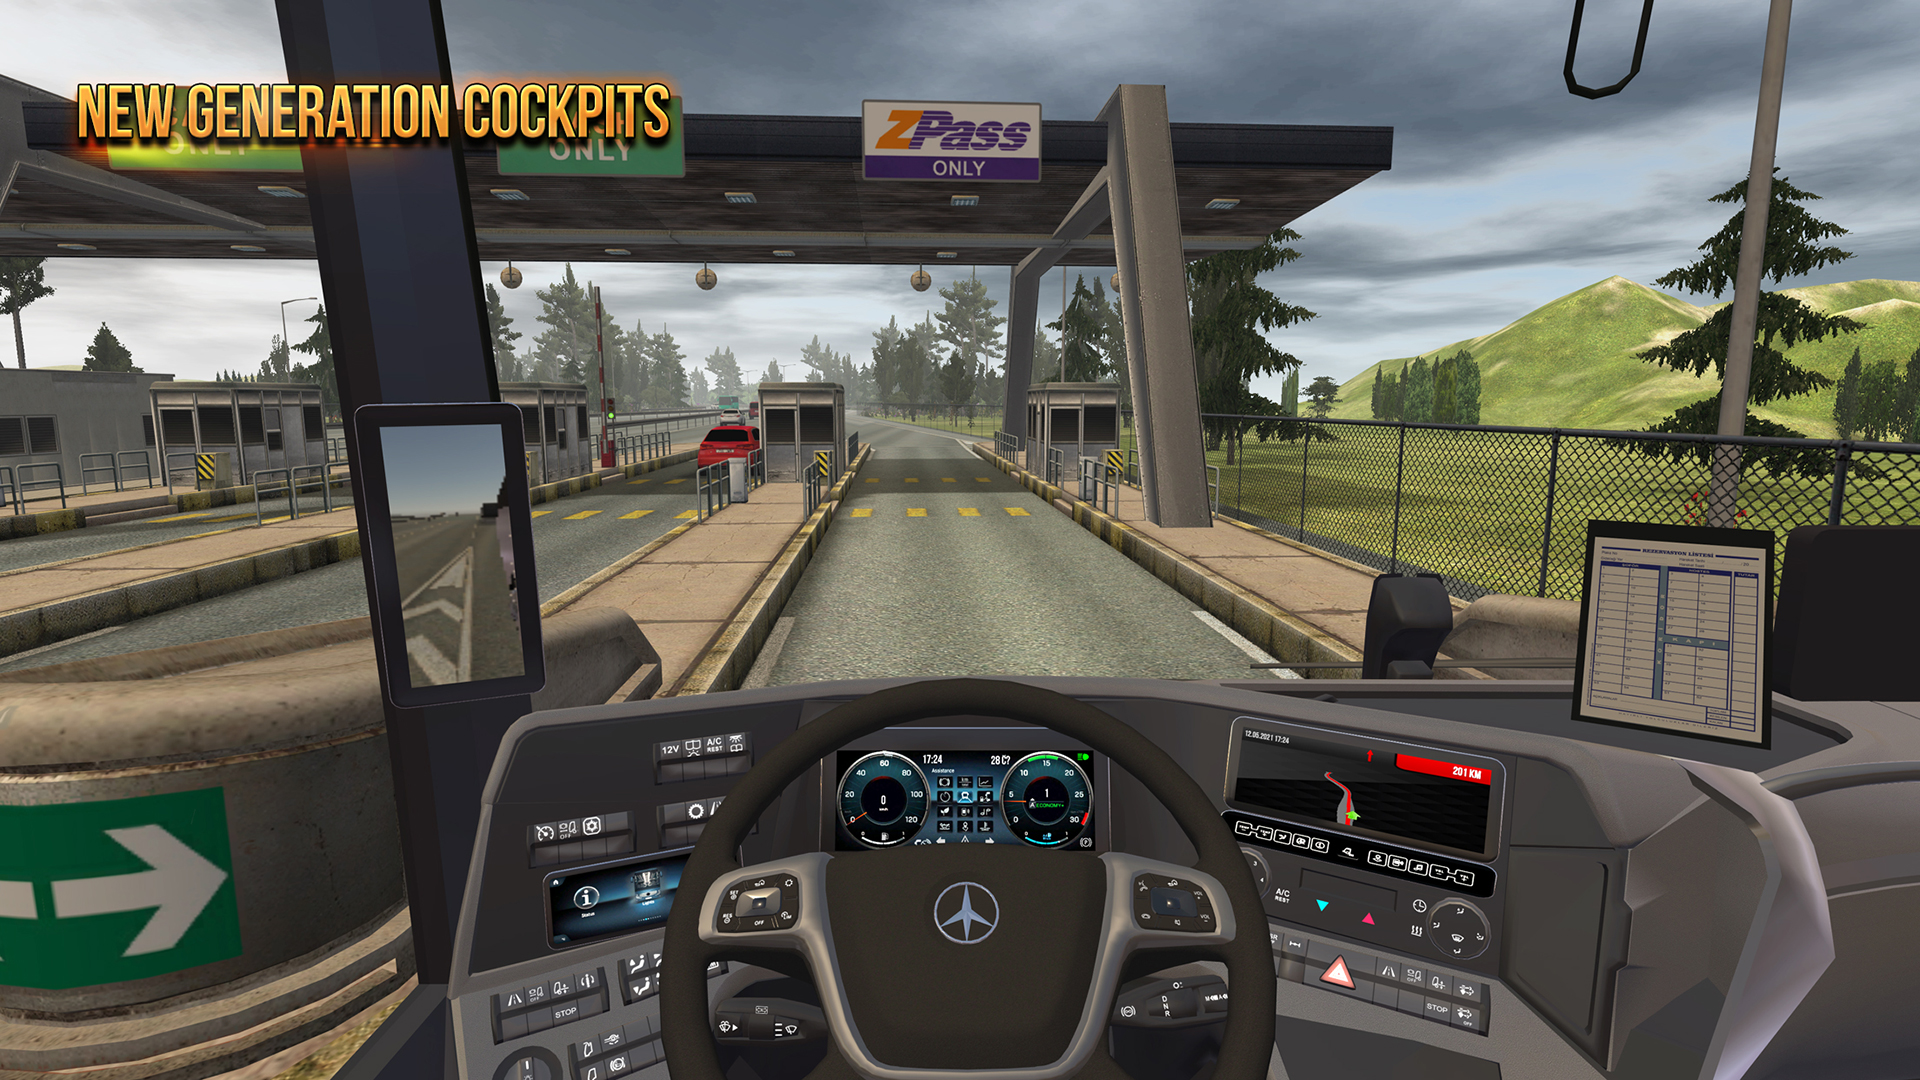 Download and play Bus Game 3D Bus Simulator Game on PC with MuMu Player